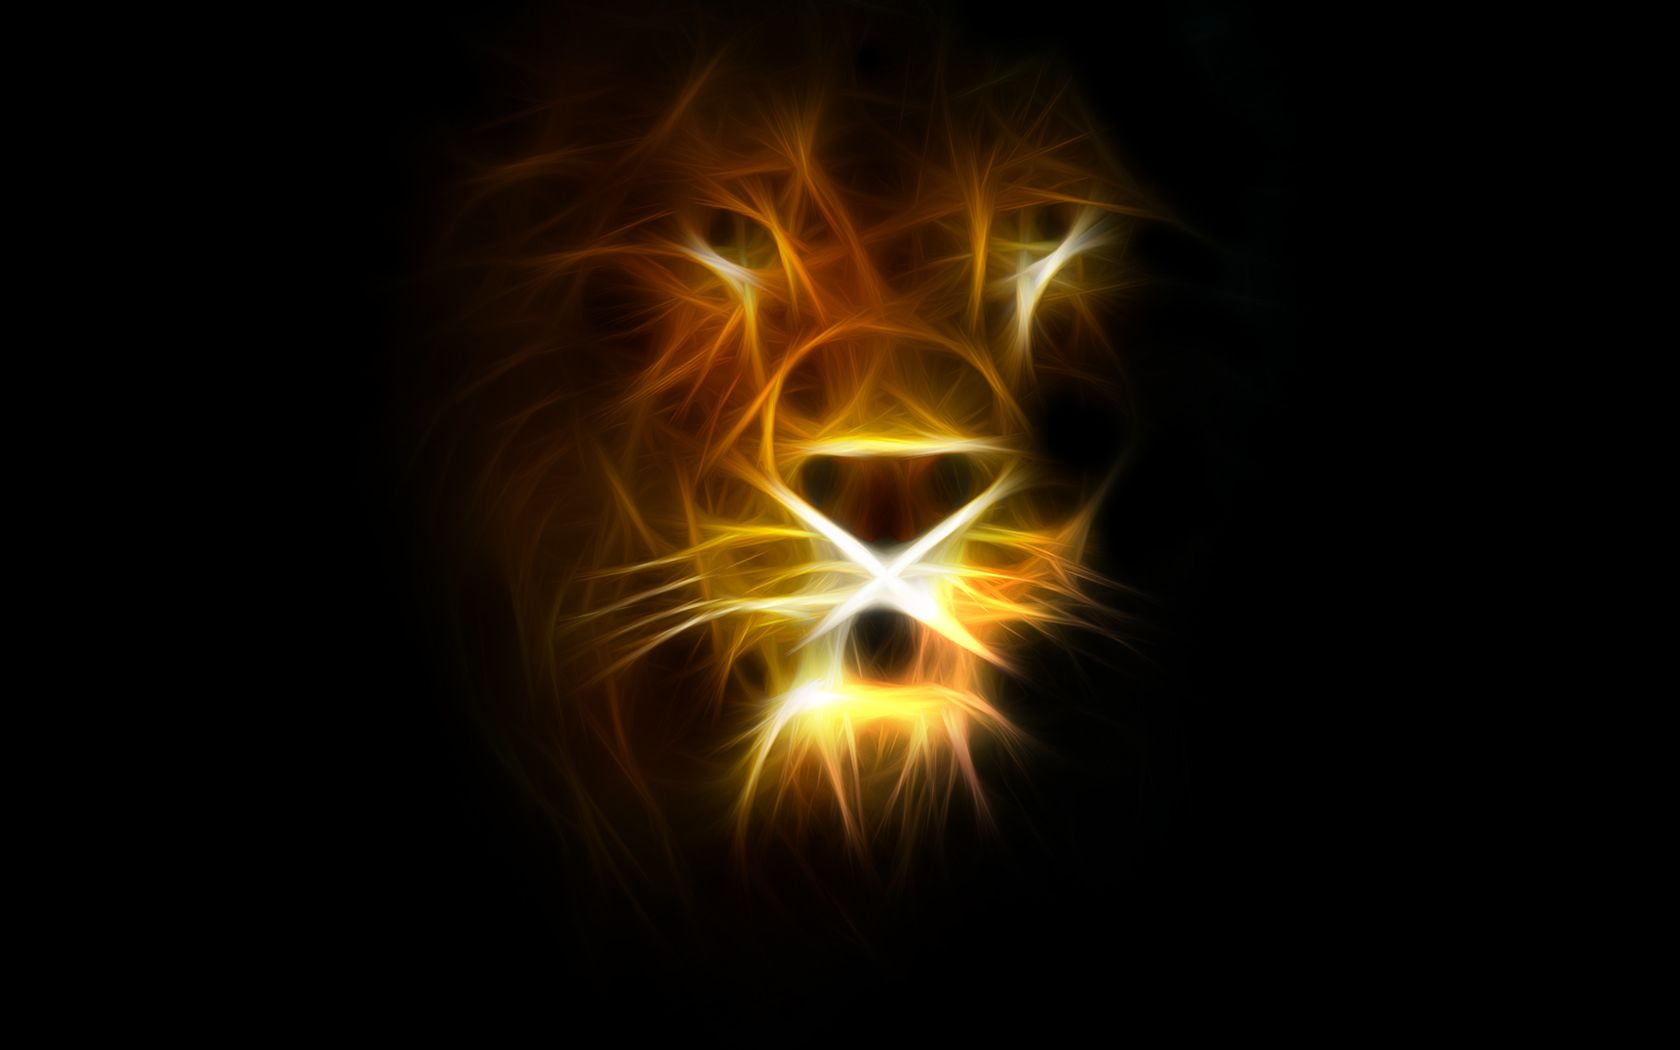 Download HD Lion Wallpapers For Desktop Background Free | HD ...